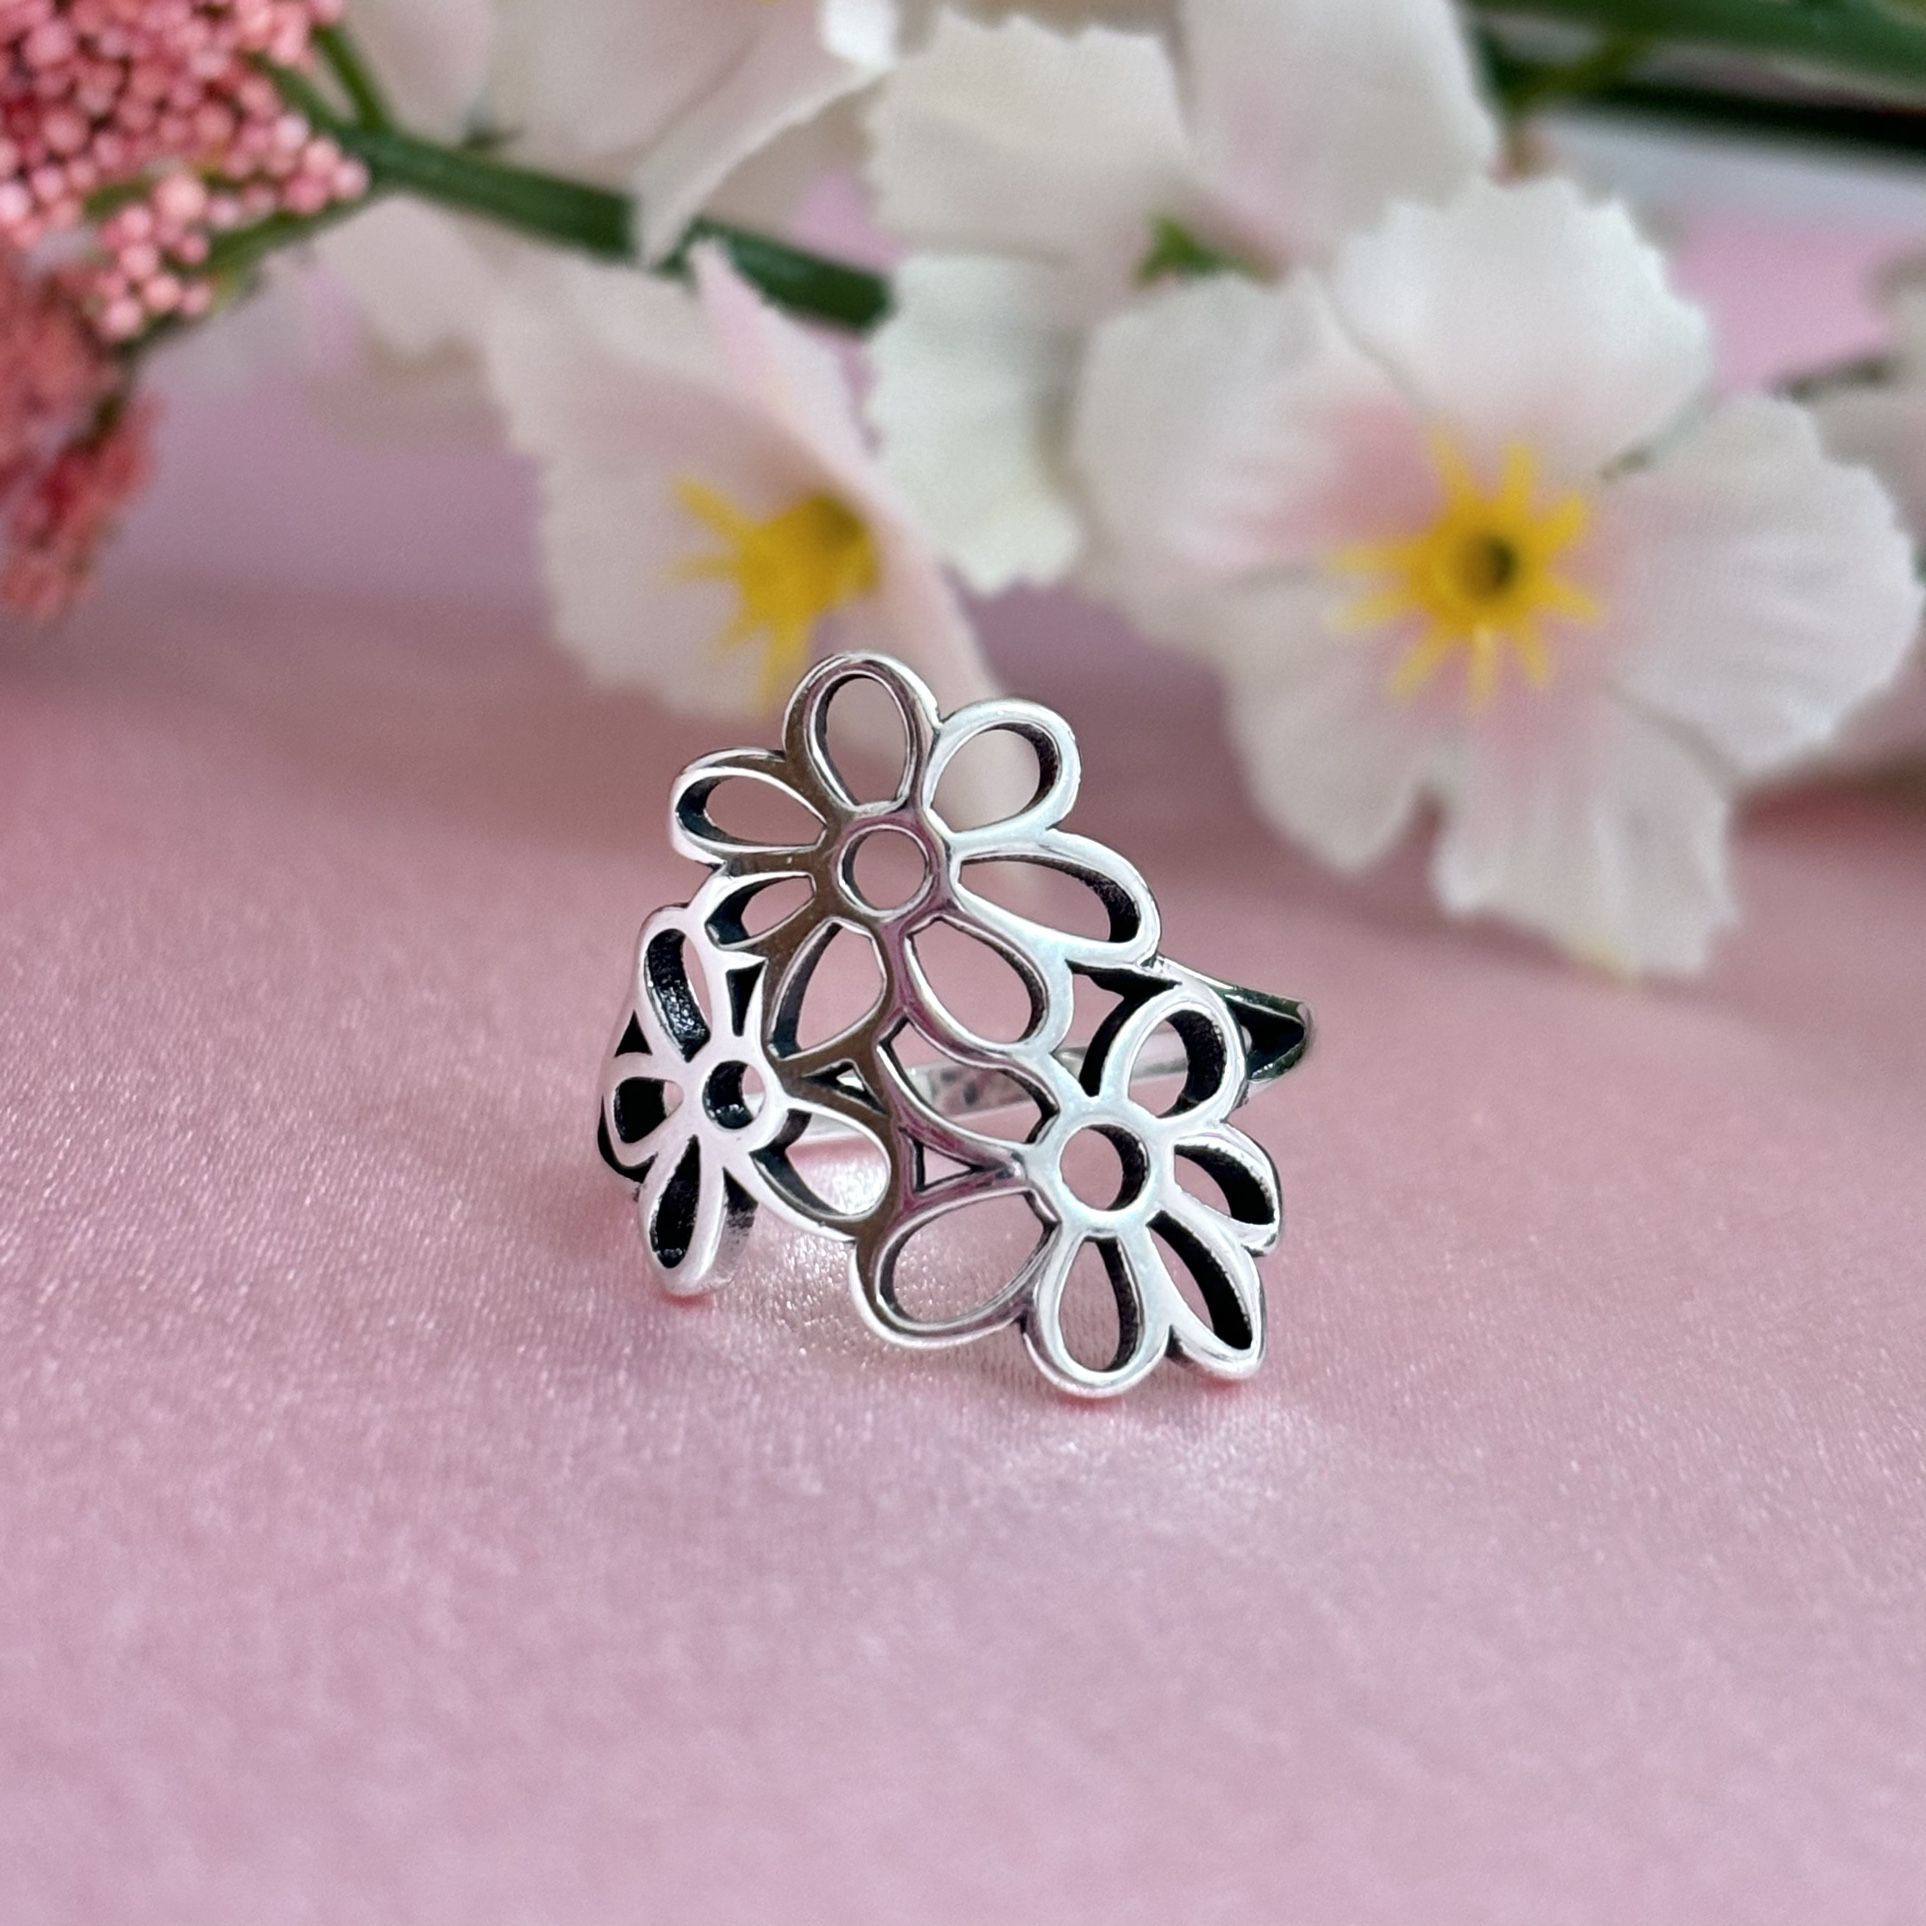 Like James Avery Open Flowers Sterling Silver Ring Different Sizes